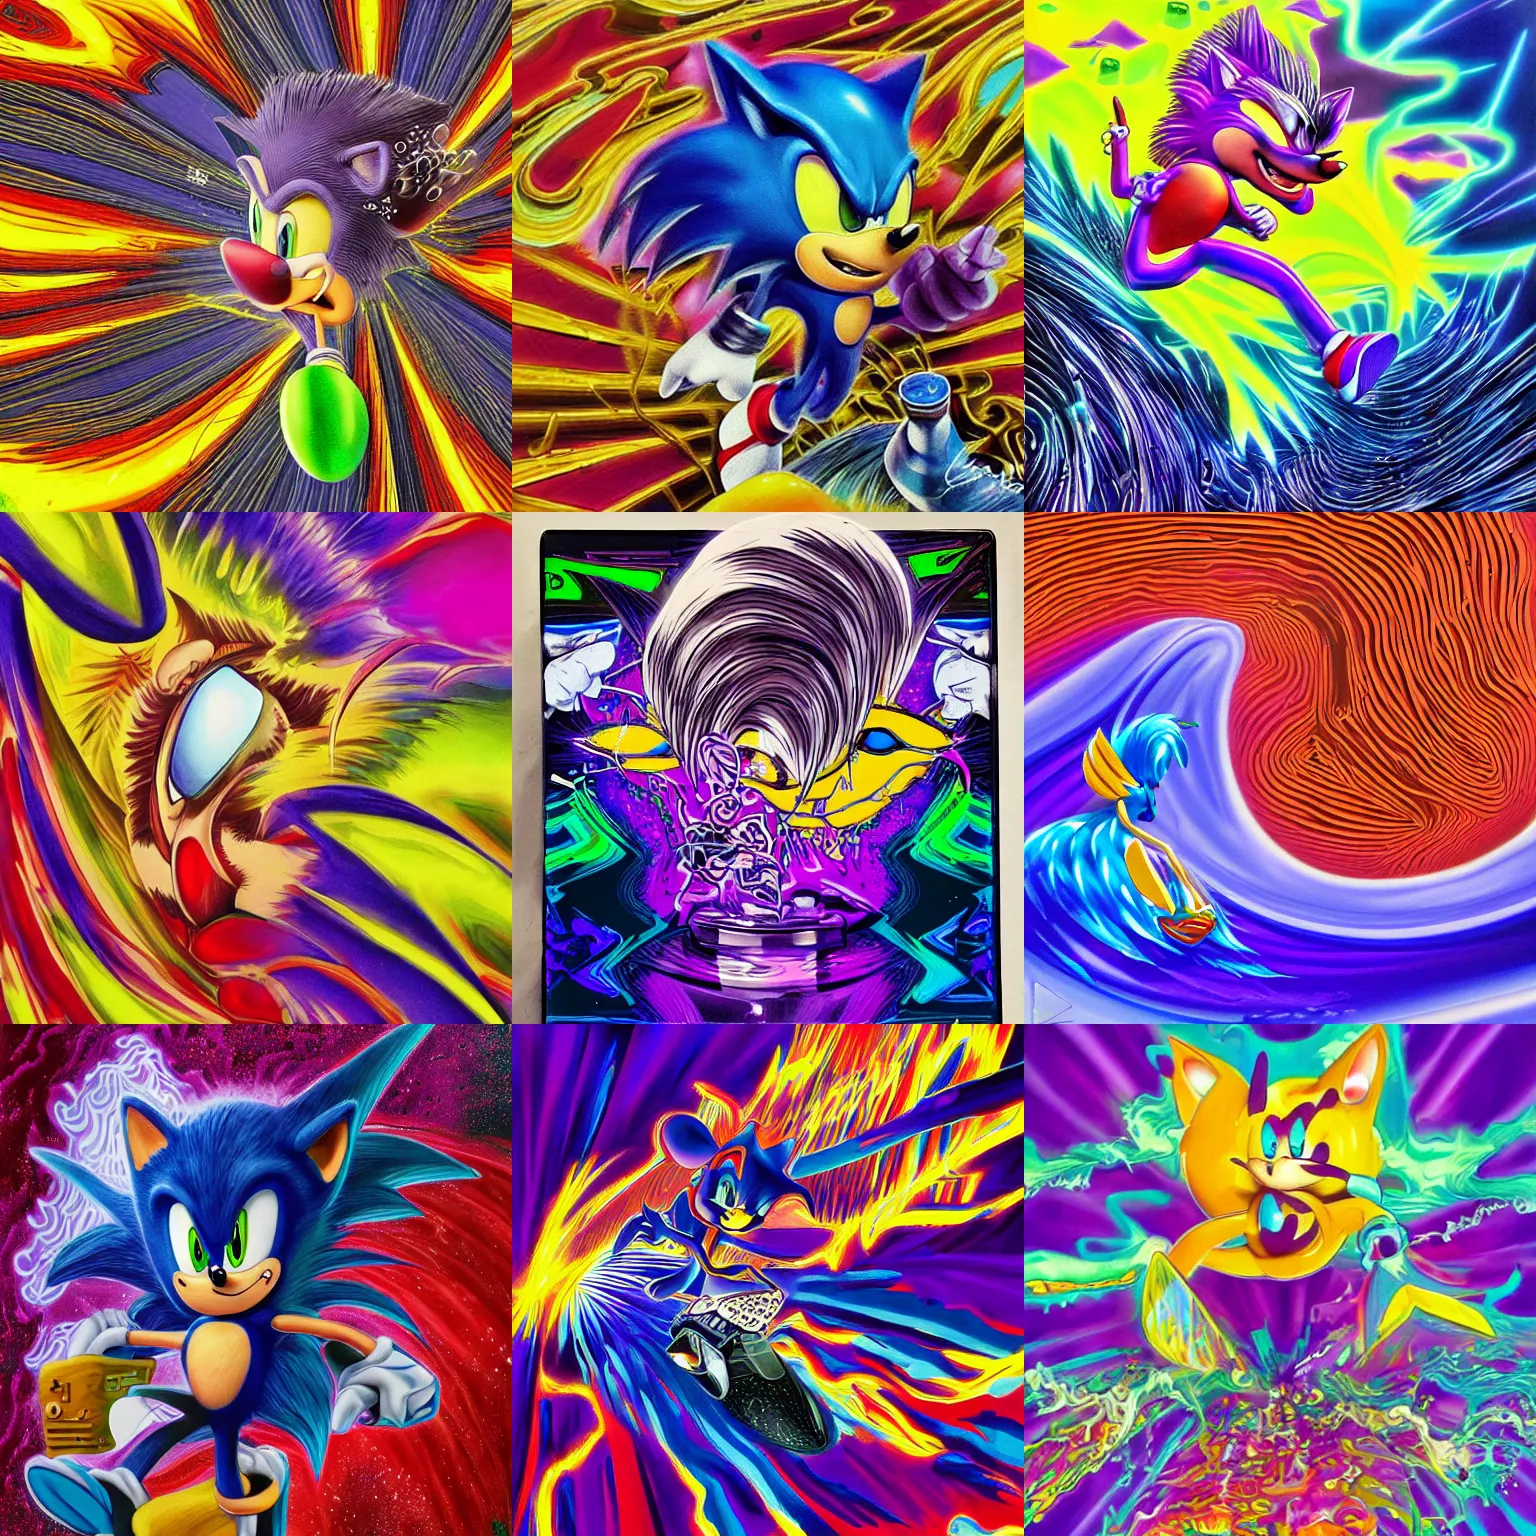 Prompt: surreal, sharp, detailed professional, high quality portrait sonic airbrush art portrait of a liquid dissolving LSD DMT sonic the hedgehog surfing through cyberspace, purple checkerboard background, 1990s 1992 Sega Genesis video game album cover